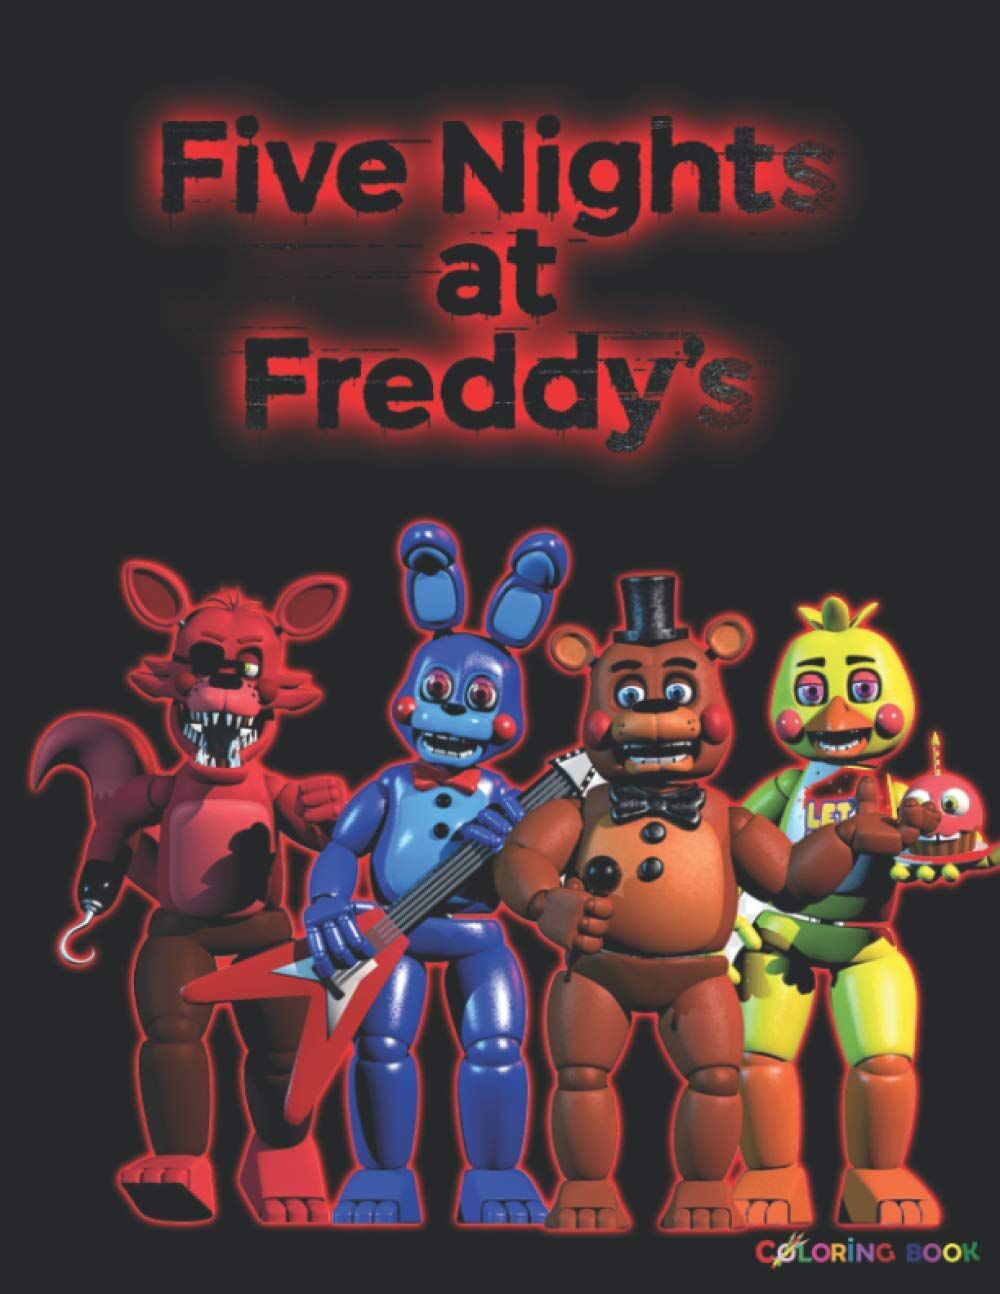 Five Nights at Freddy's 1-4 on PS4, Xbox One and Nintendo Switch (Nov 29th)  